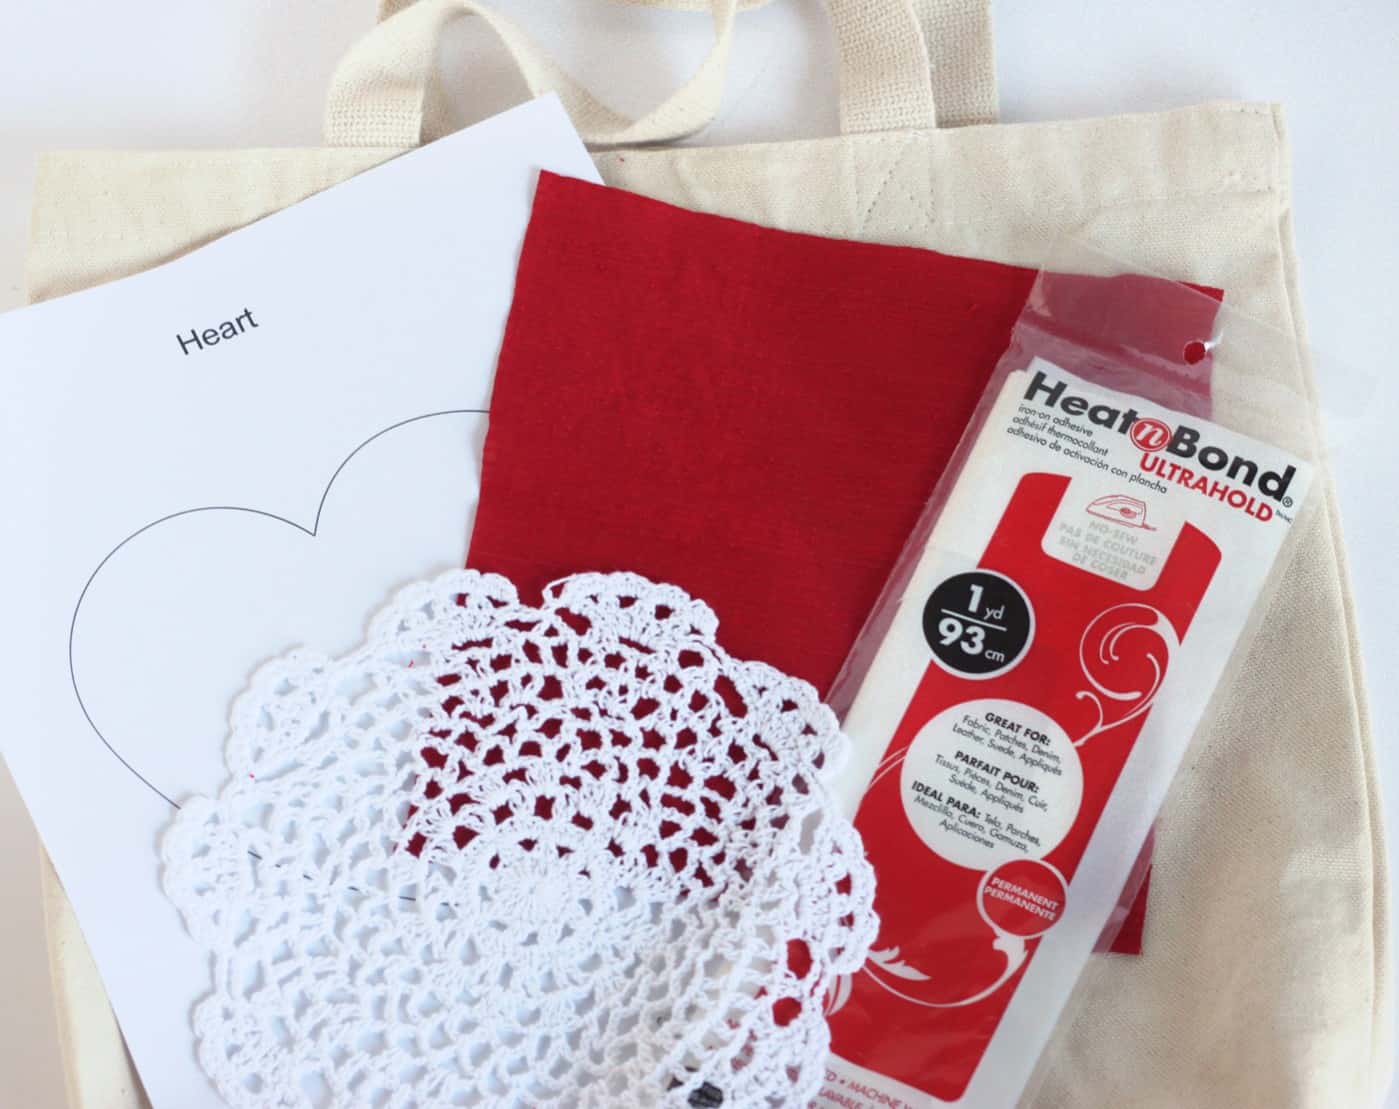 Canvas tote bag, heart template, white doily, red fabric, and Heat n' Bond Ultrahold